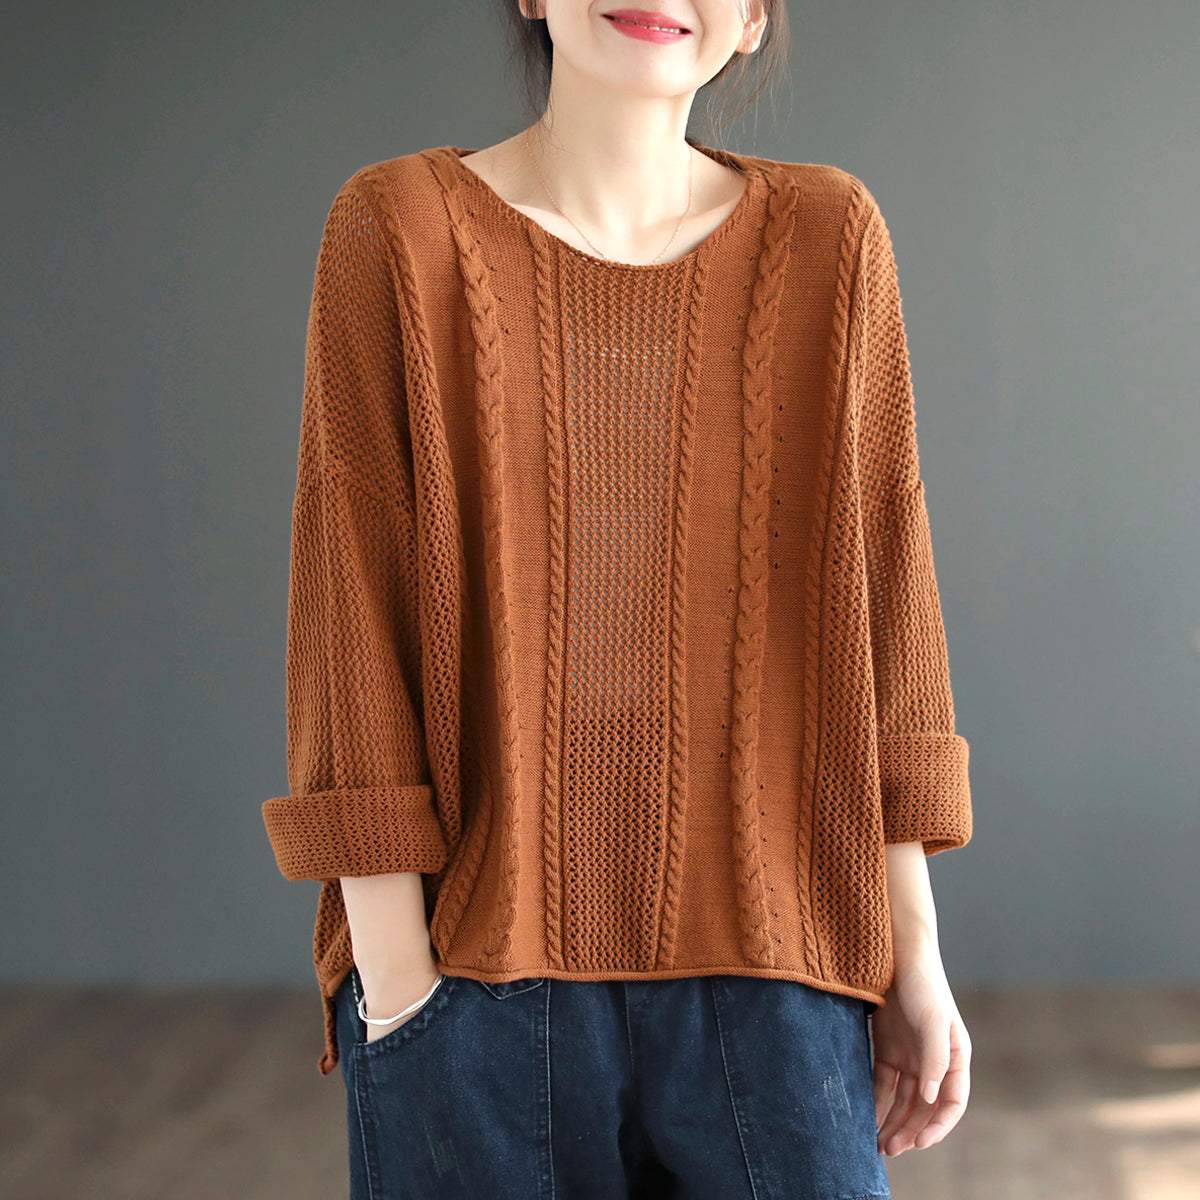 Women Retro Loose Cotton Knitted Sweater Plus Size Aug 2022 New Arrival One Size Orange 